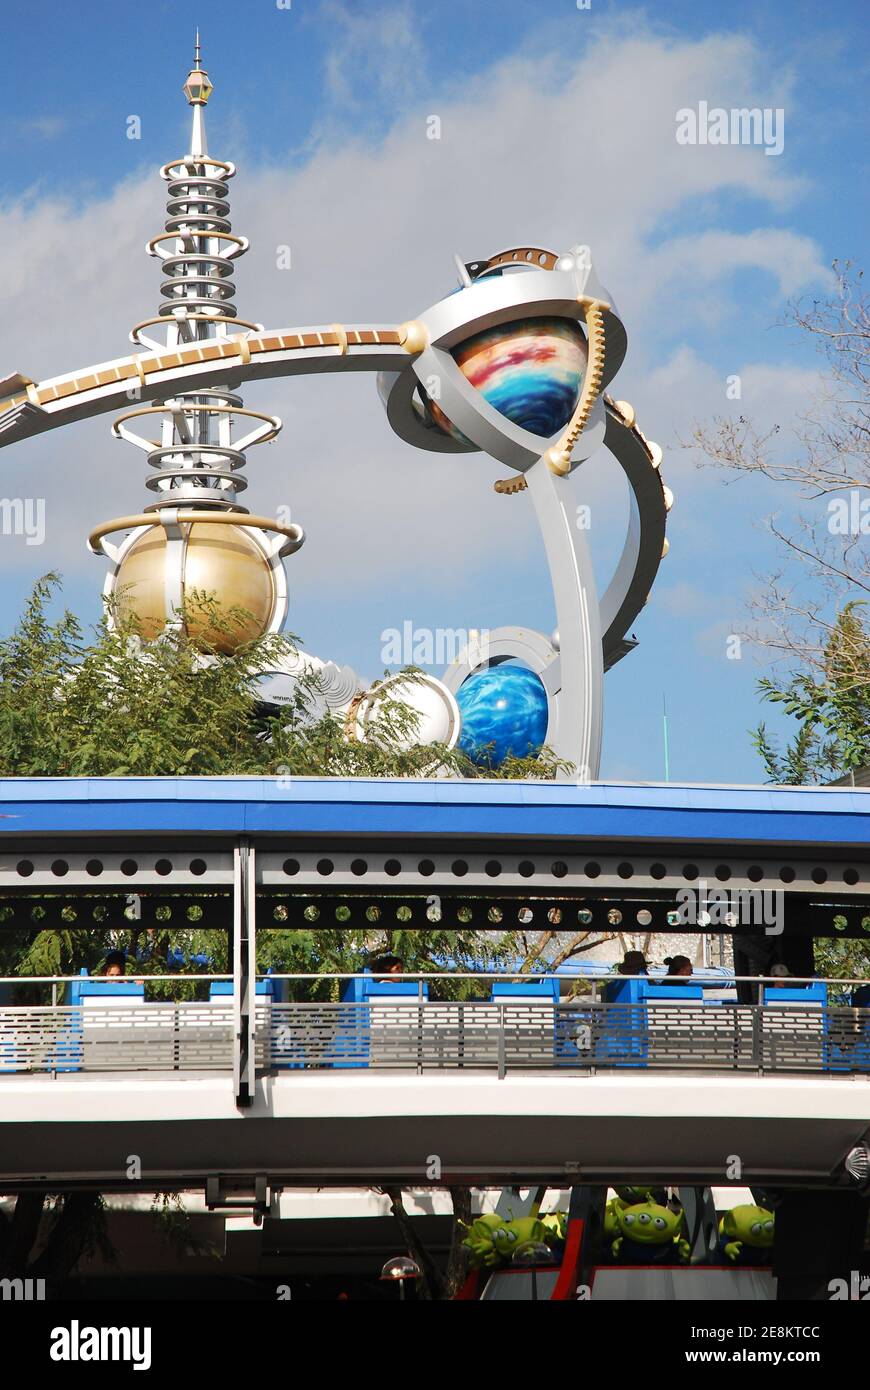 A whimsical design over the World of Tomorrow at Walt Disney World in Orlando Florida Stock Photo